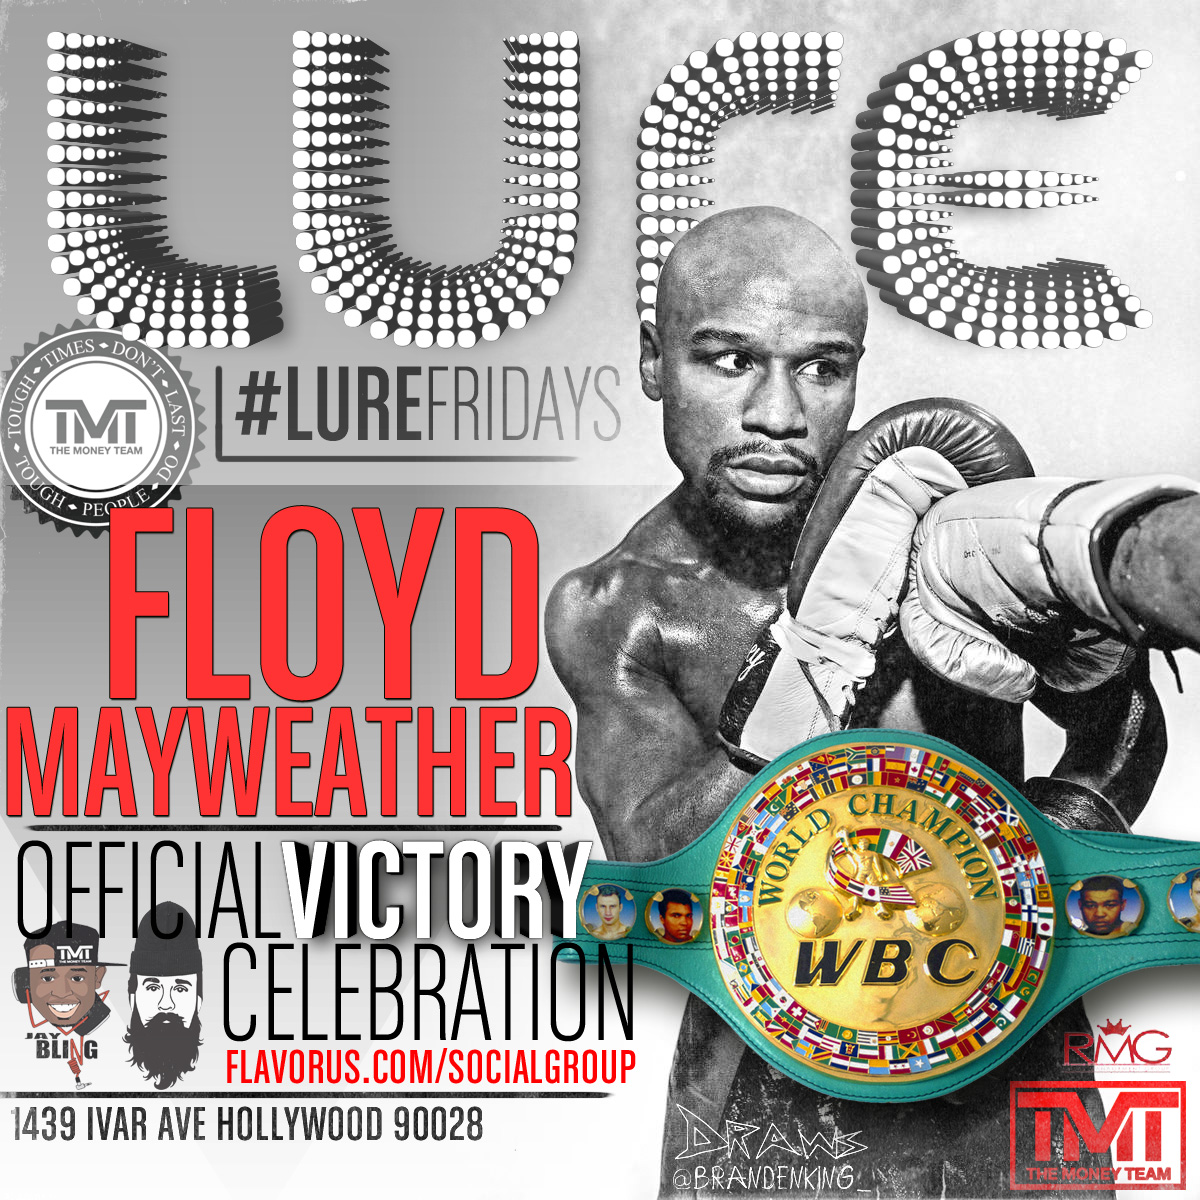 Floyd Money Mayweather Official Victory Celebration Tickets 05/15/15